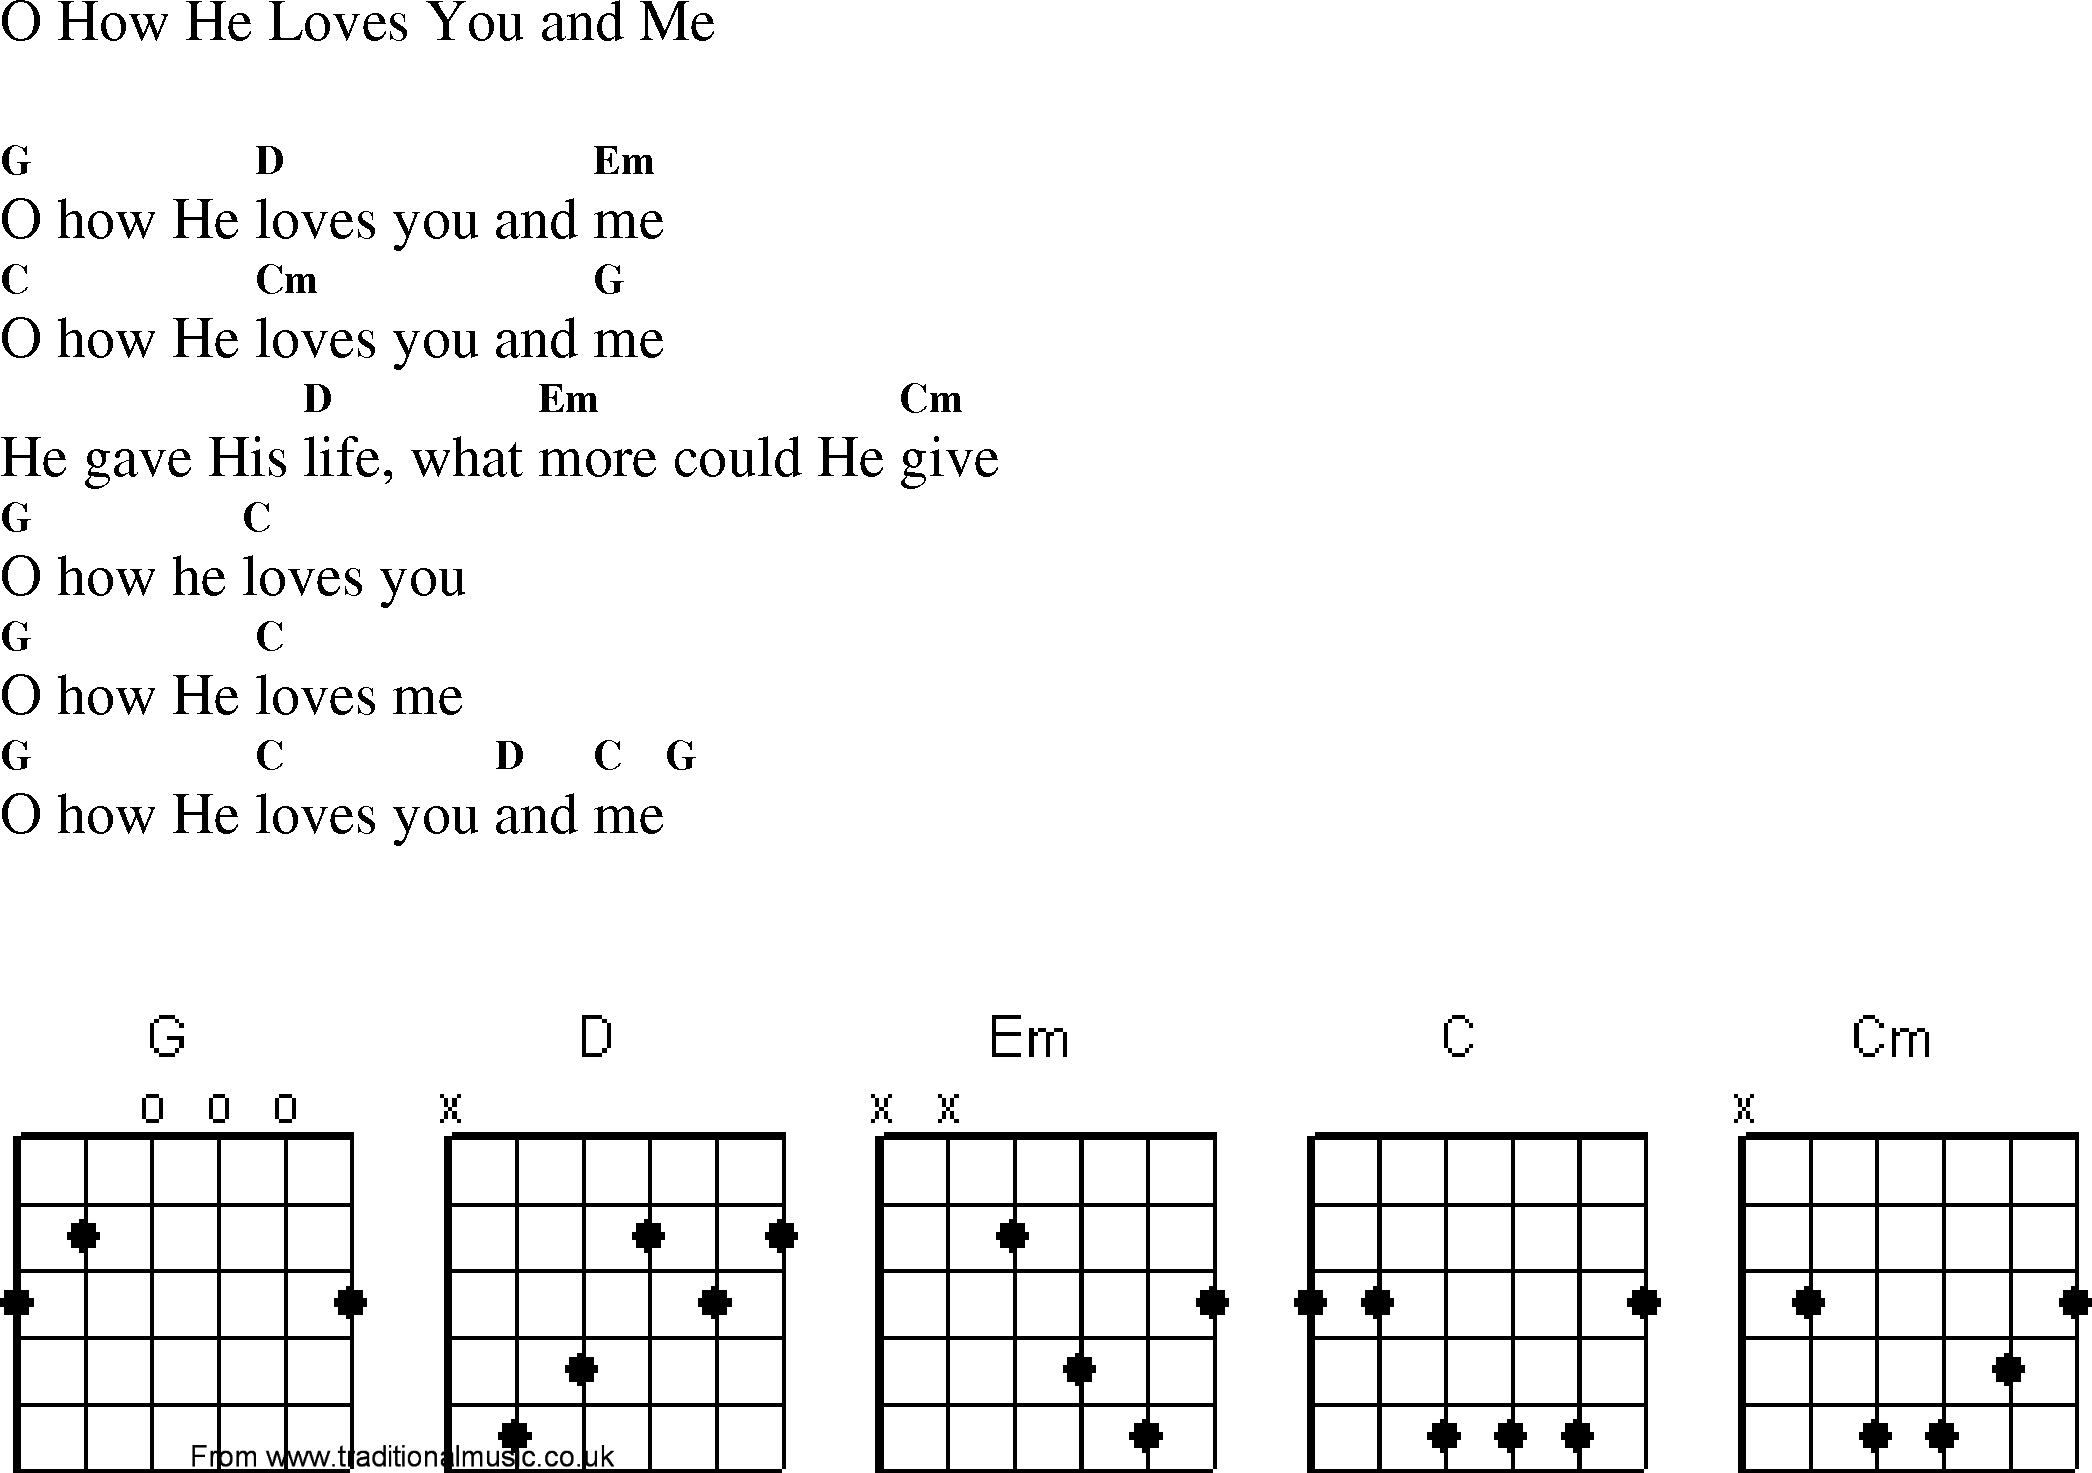 Gospel Song: o_how_he_loves_you_and_me, lyrics and chords.